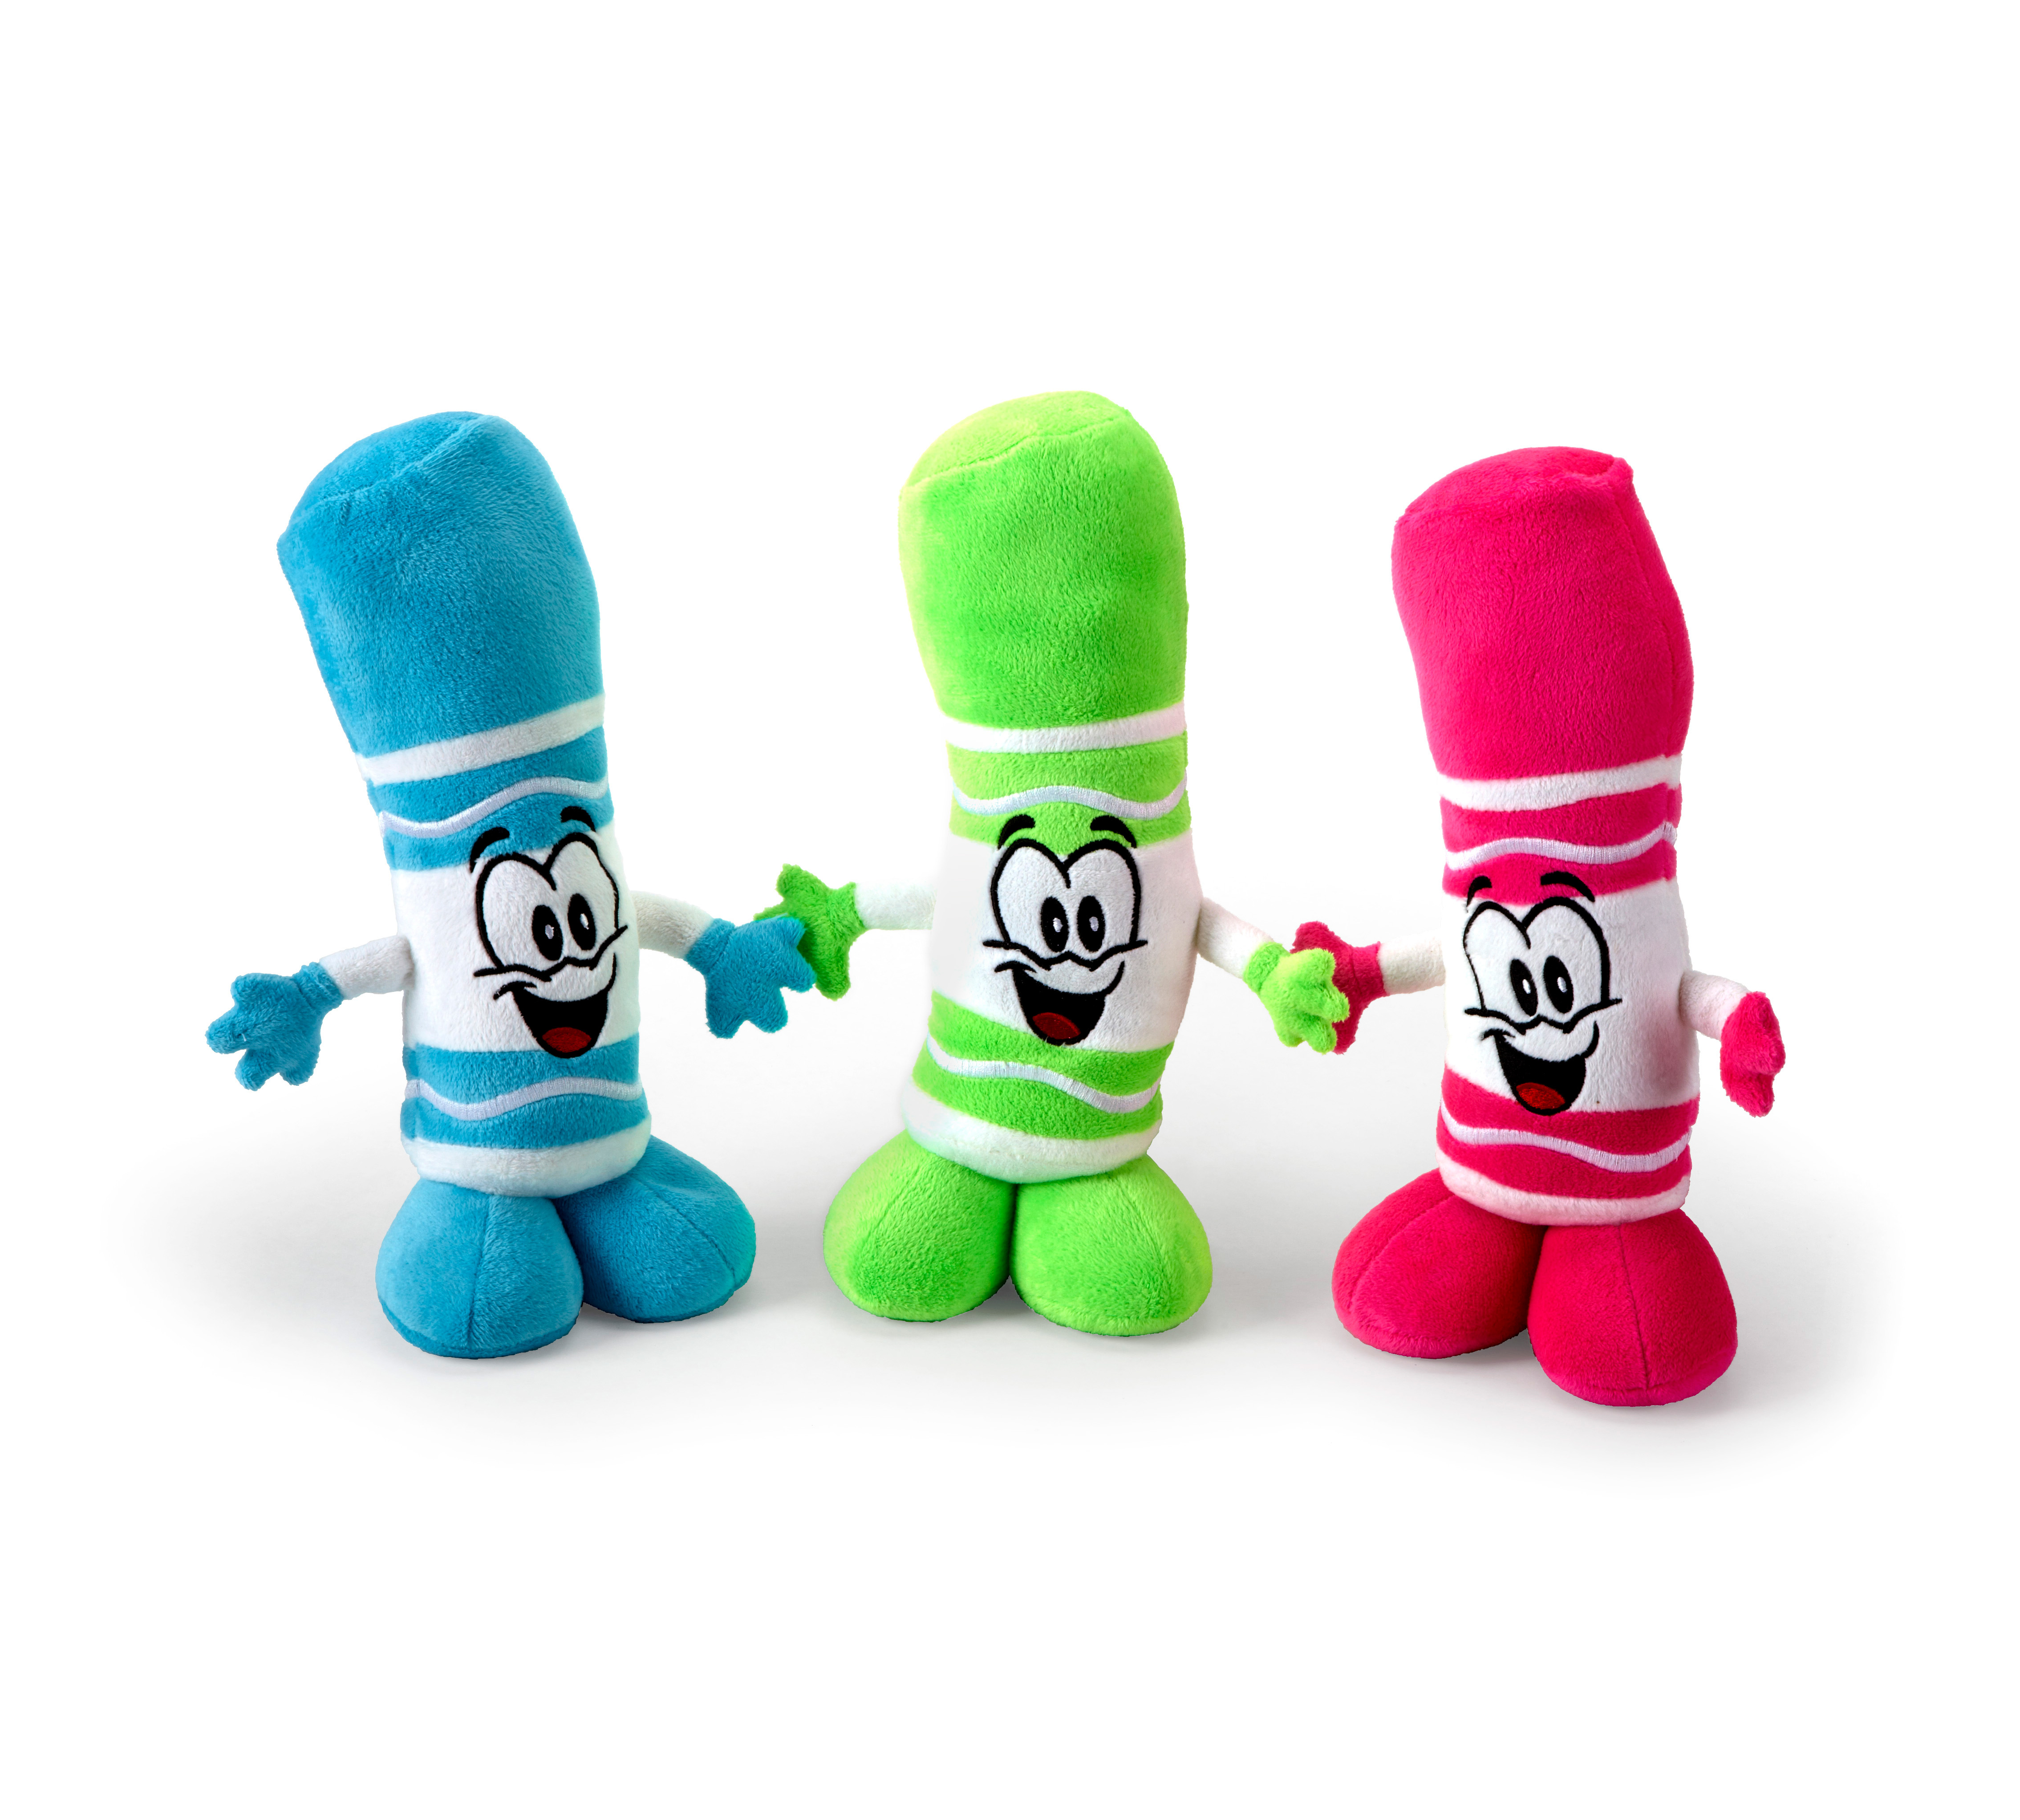 The minature side-kick of the as seen on tv Tip Character, the 10 Inch Pip-Squeak  plush!  | Crayola